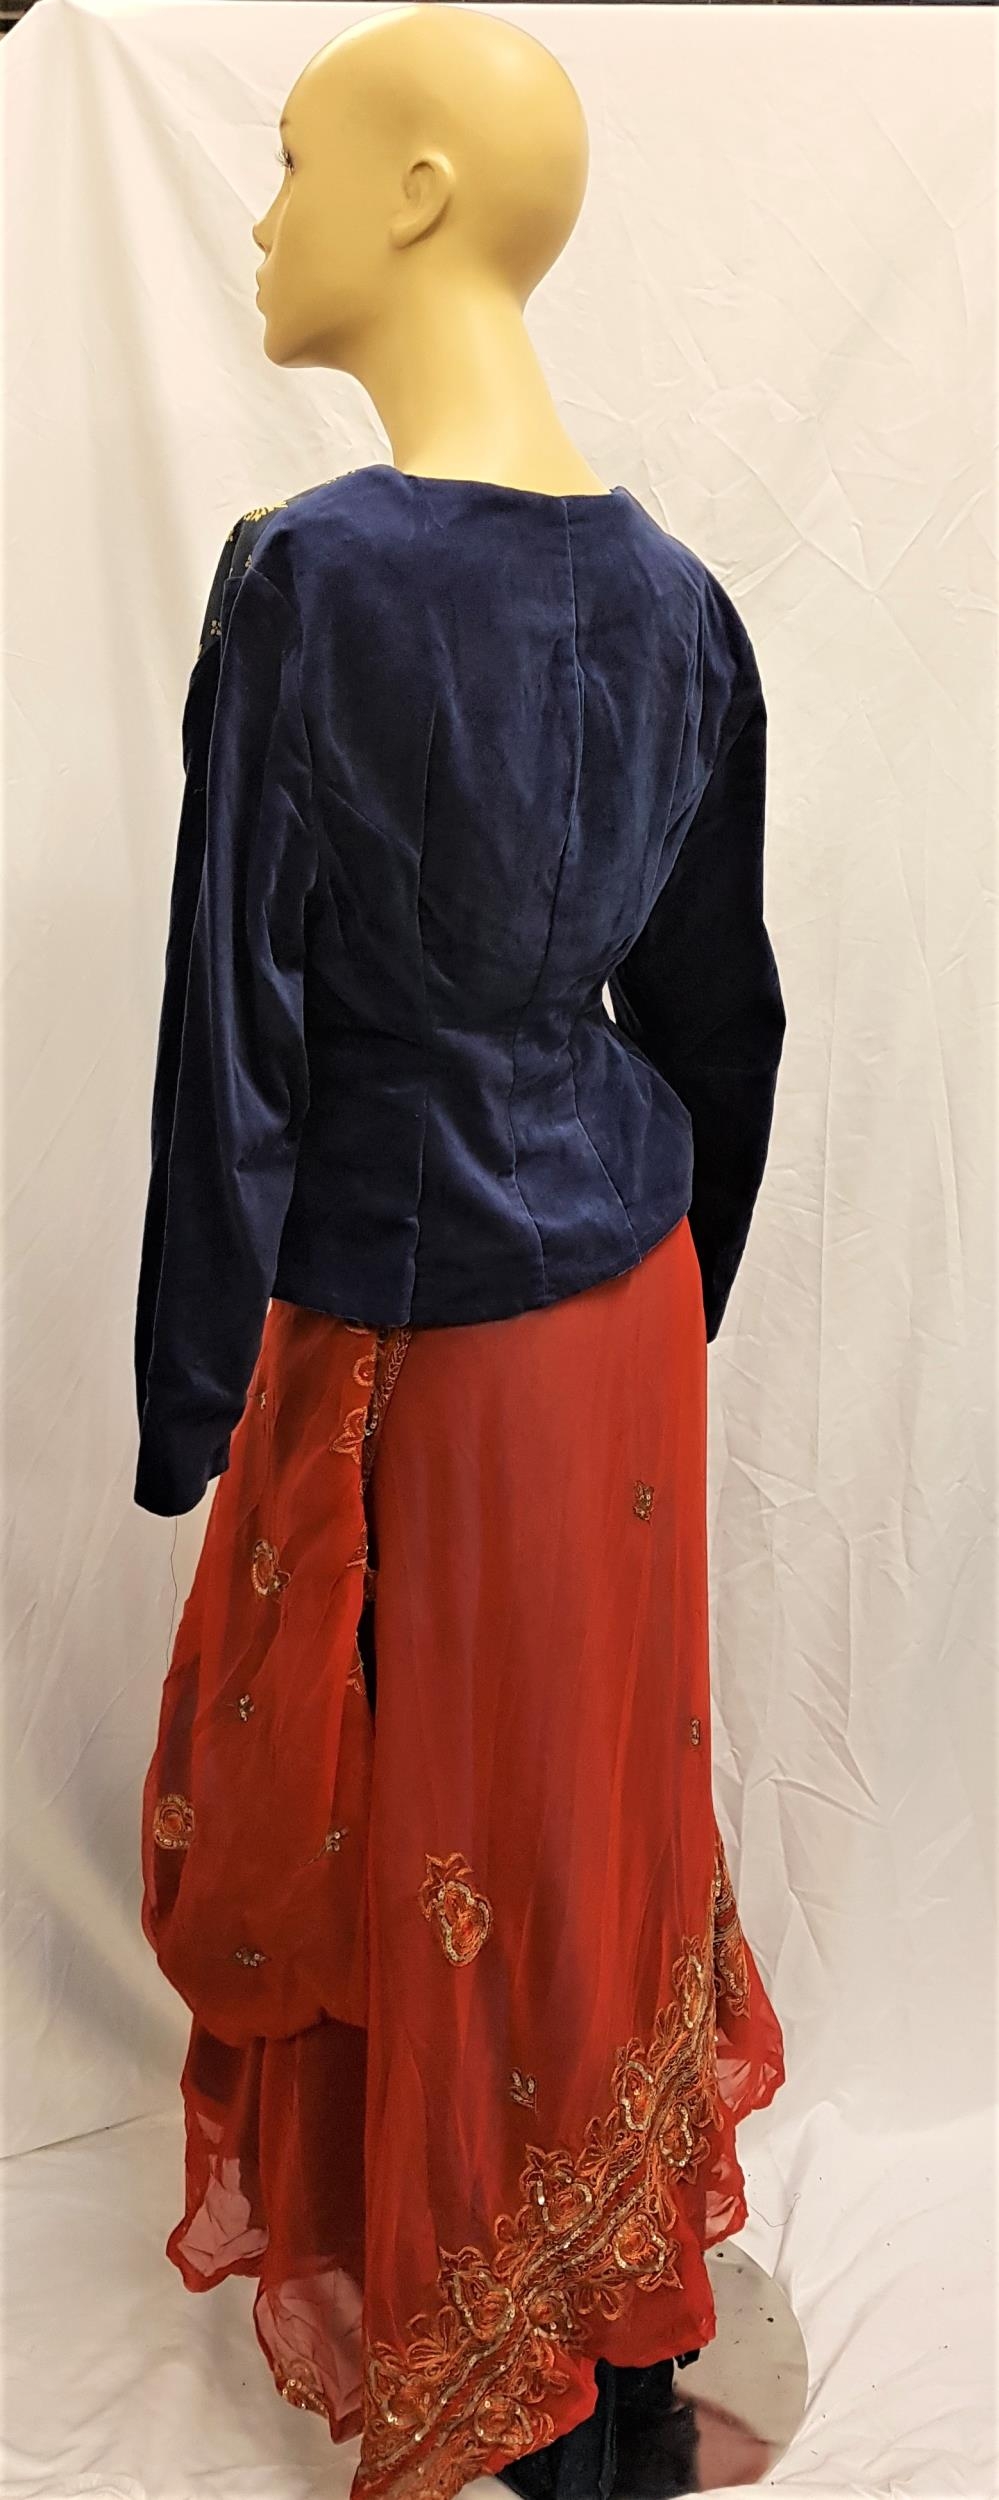 ELLA ENCHANTED (2004) - FOUR PIECE OUTFIT comprising a navy blue velvet and patterned jacket - Image 2 of 4